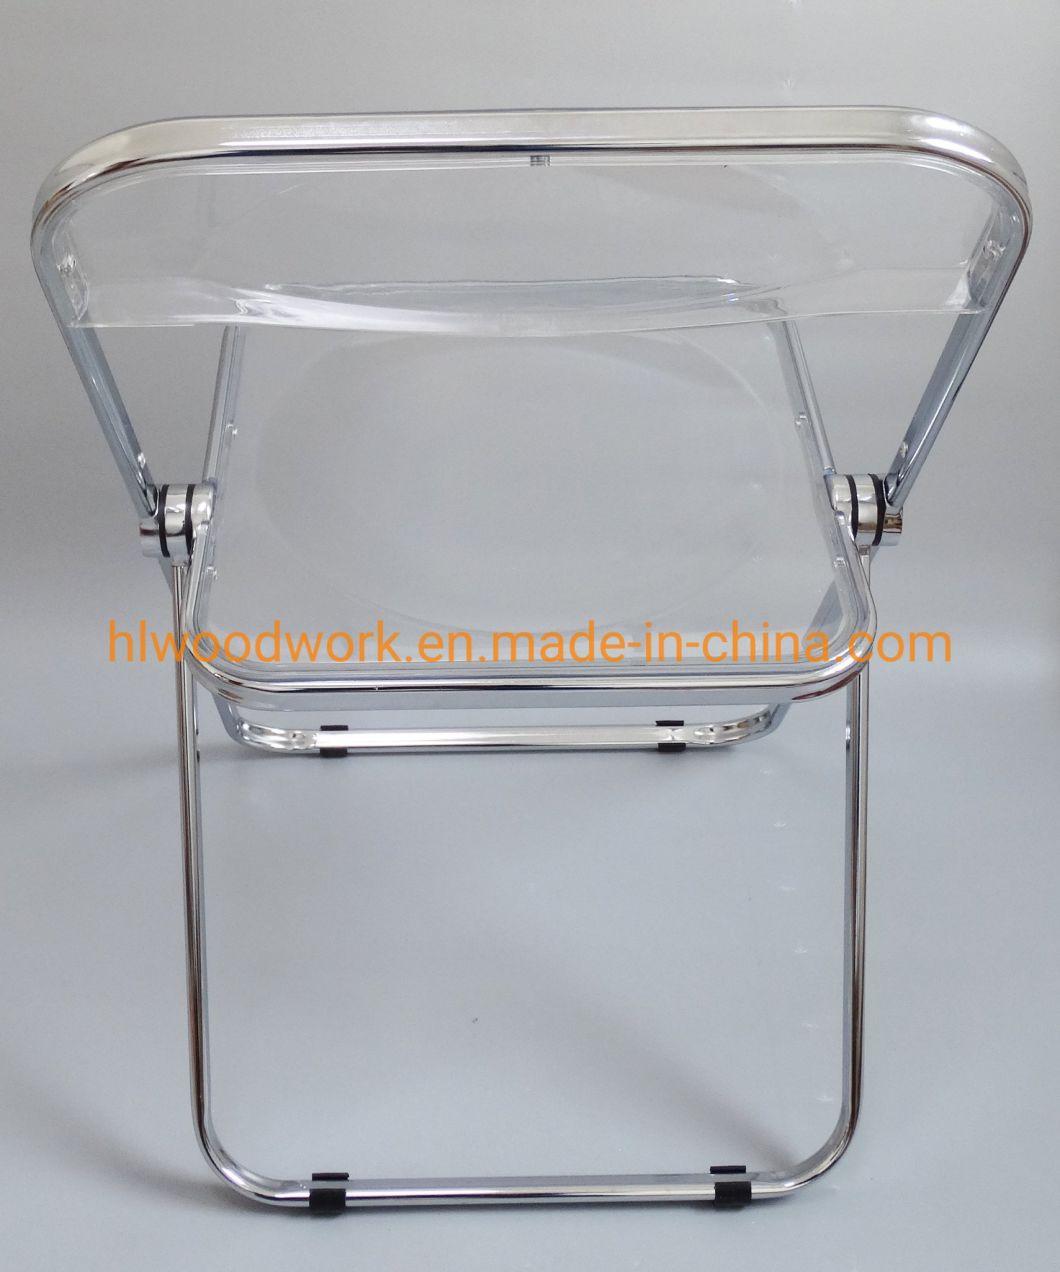 Modern Transparent Red Folding Chair PC Plastic Living Room Chair Chrome Frame Office Bar Dining Leisure Banquet Wedding Meeting Chair Plastic Dining Chair